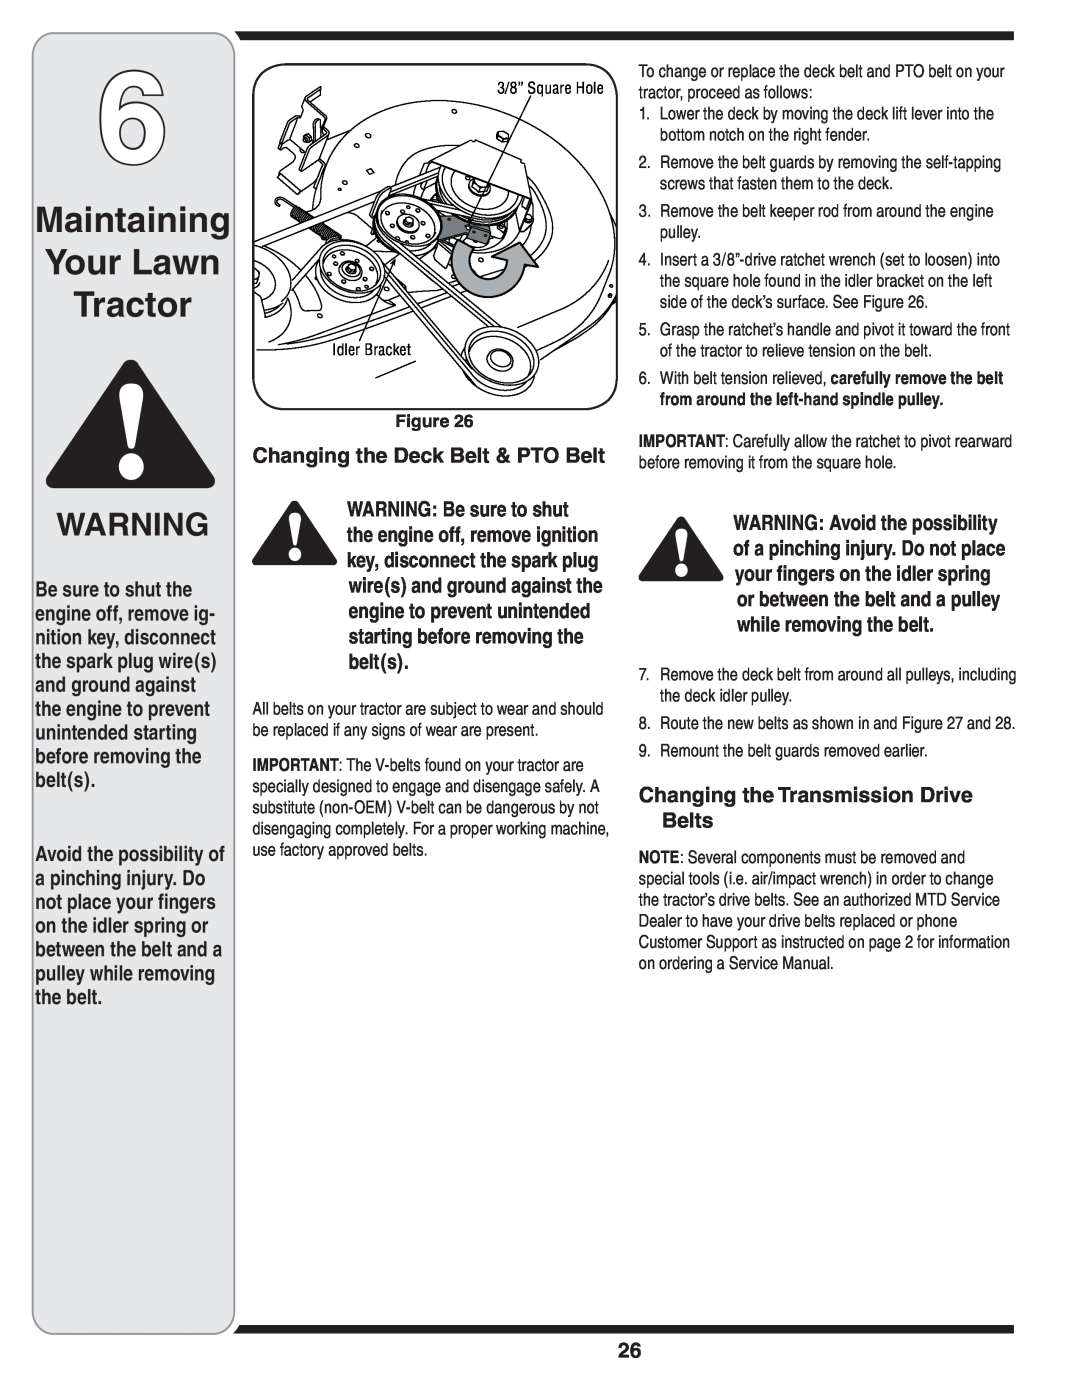 MTD 760-779 Changing the Deck Belt & PTO Belt, Changing the Transmission Drive Belts, Maintaining Your Lawn Tractor 